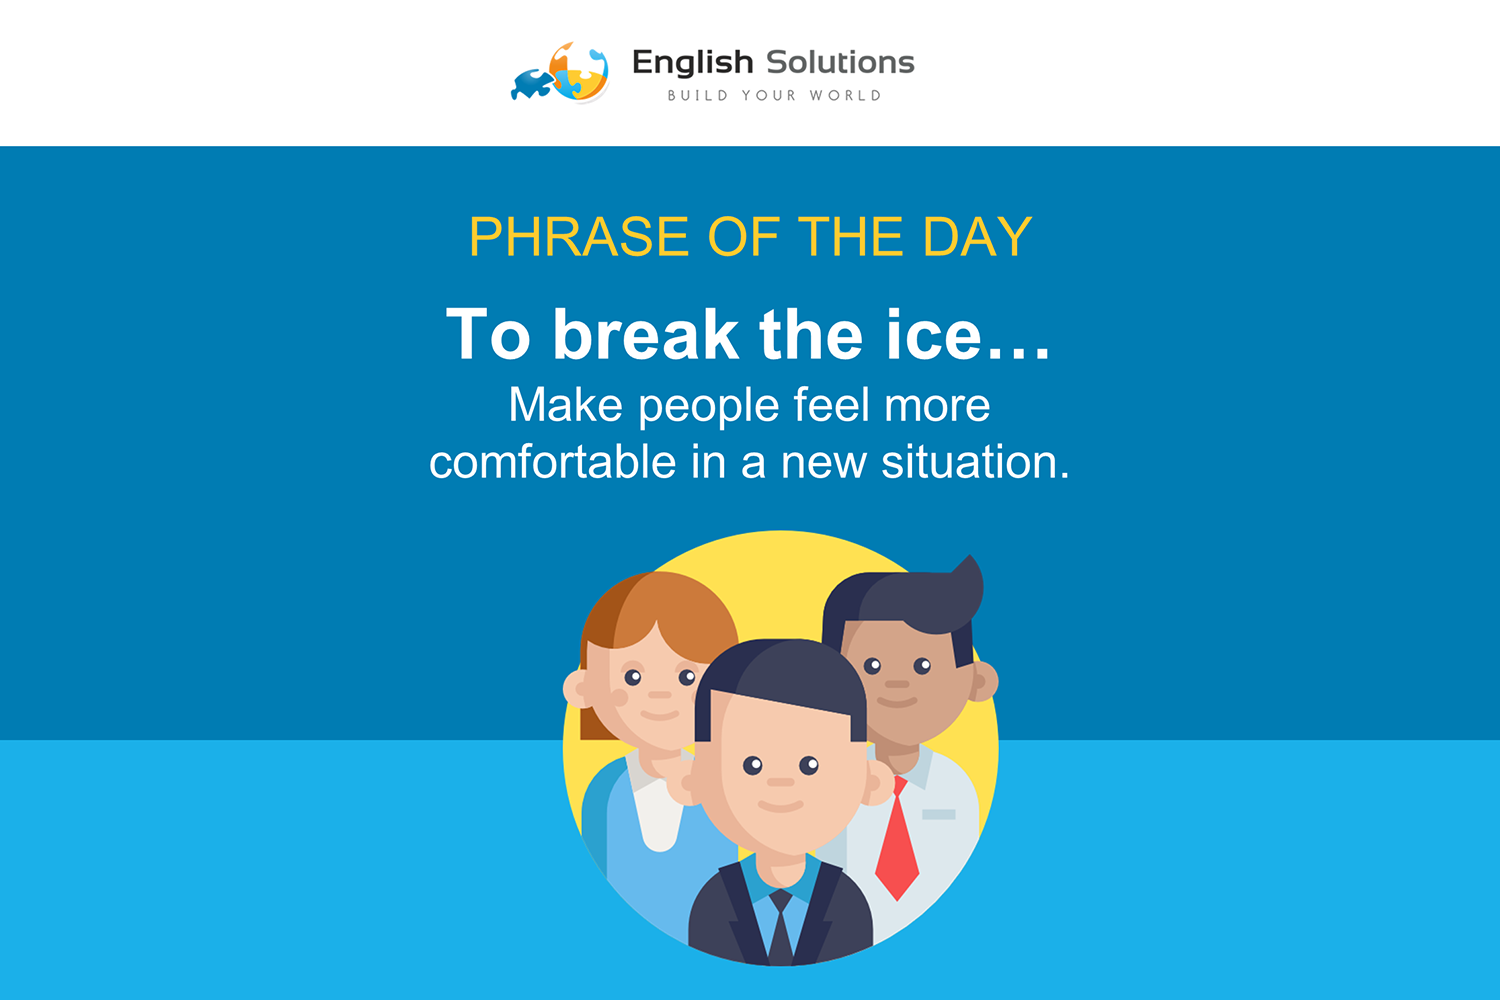 https://englishsolutions.co.il/wp-content/uploads/2019/03/To-break-the-ice-heading-new.png